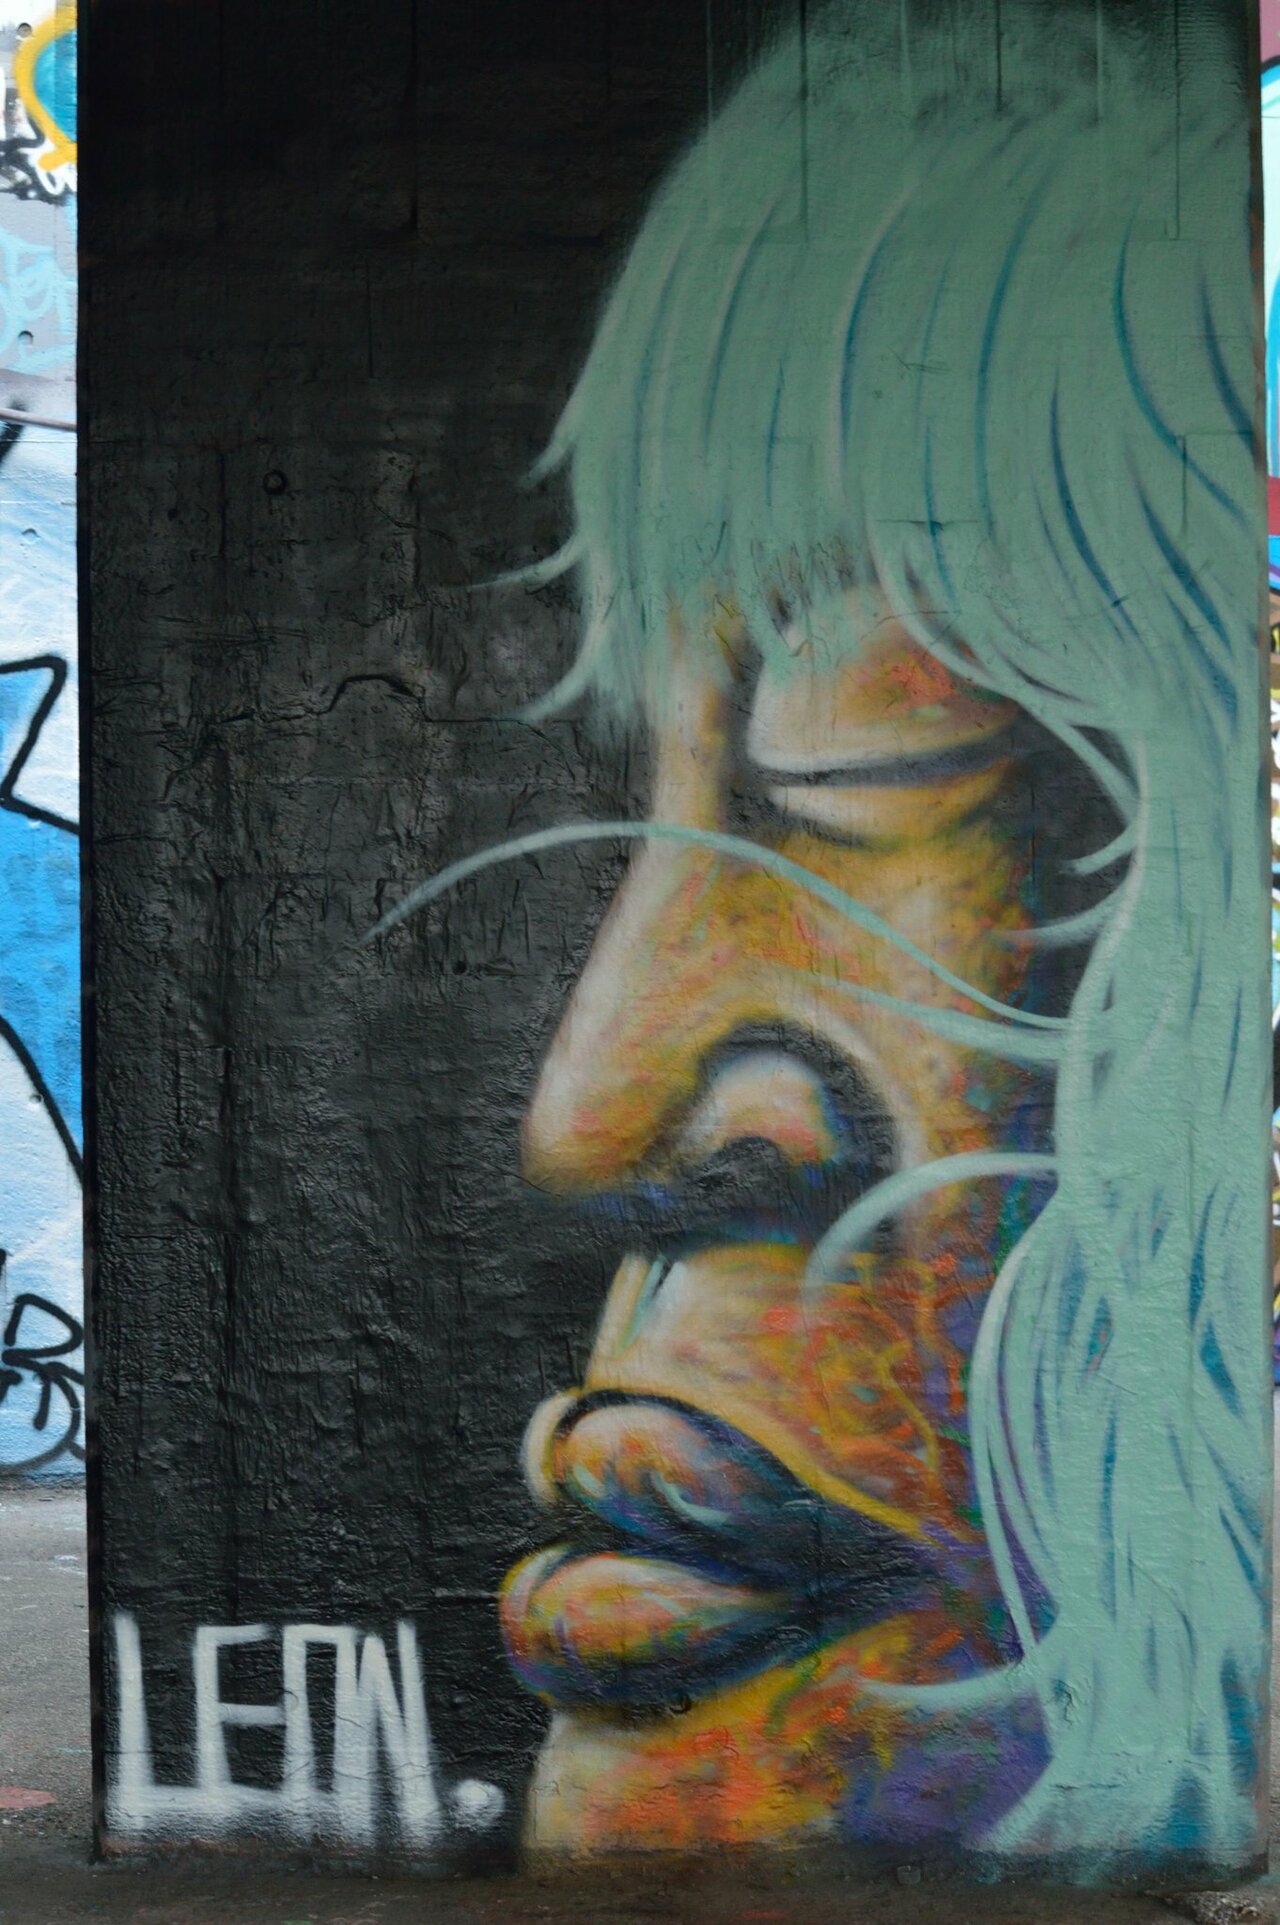 3 From a recent #Graffiti shoot #London #SouthBank #SkatePark #NikonD3200 This #streetart is amazing, such talent. http://t.co/ahr7a87yyN